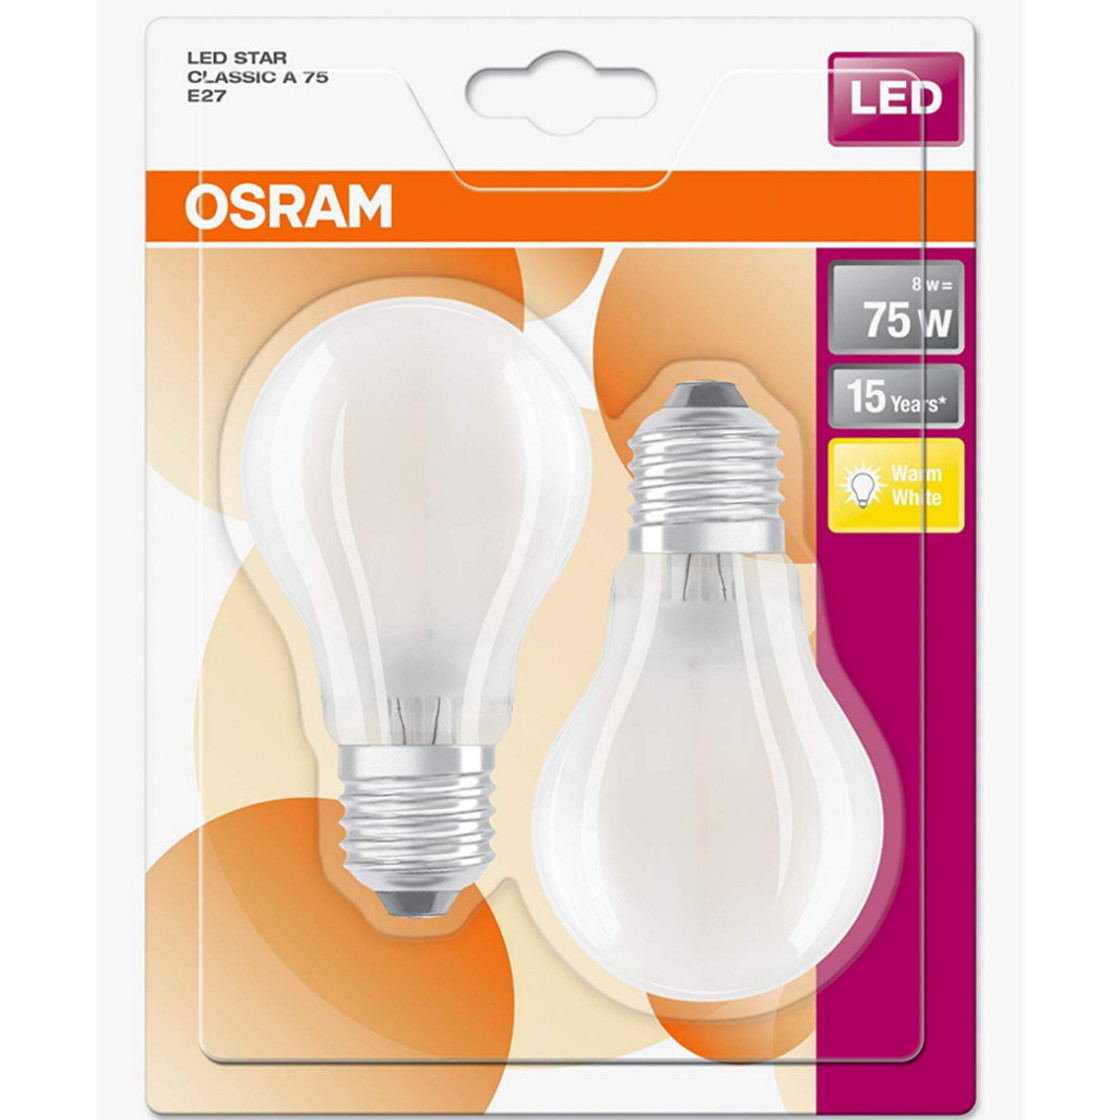 Give Moralsk Smil 2x Osram LED Star Classic A75 Filament E27 Leuchtmittel 8W=75W Warmwe, 9,99  €